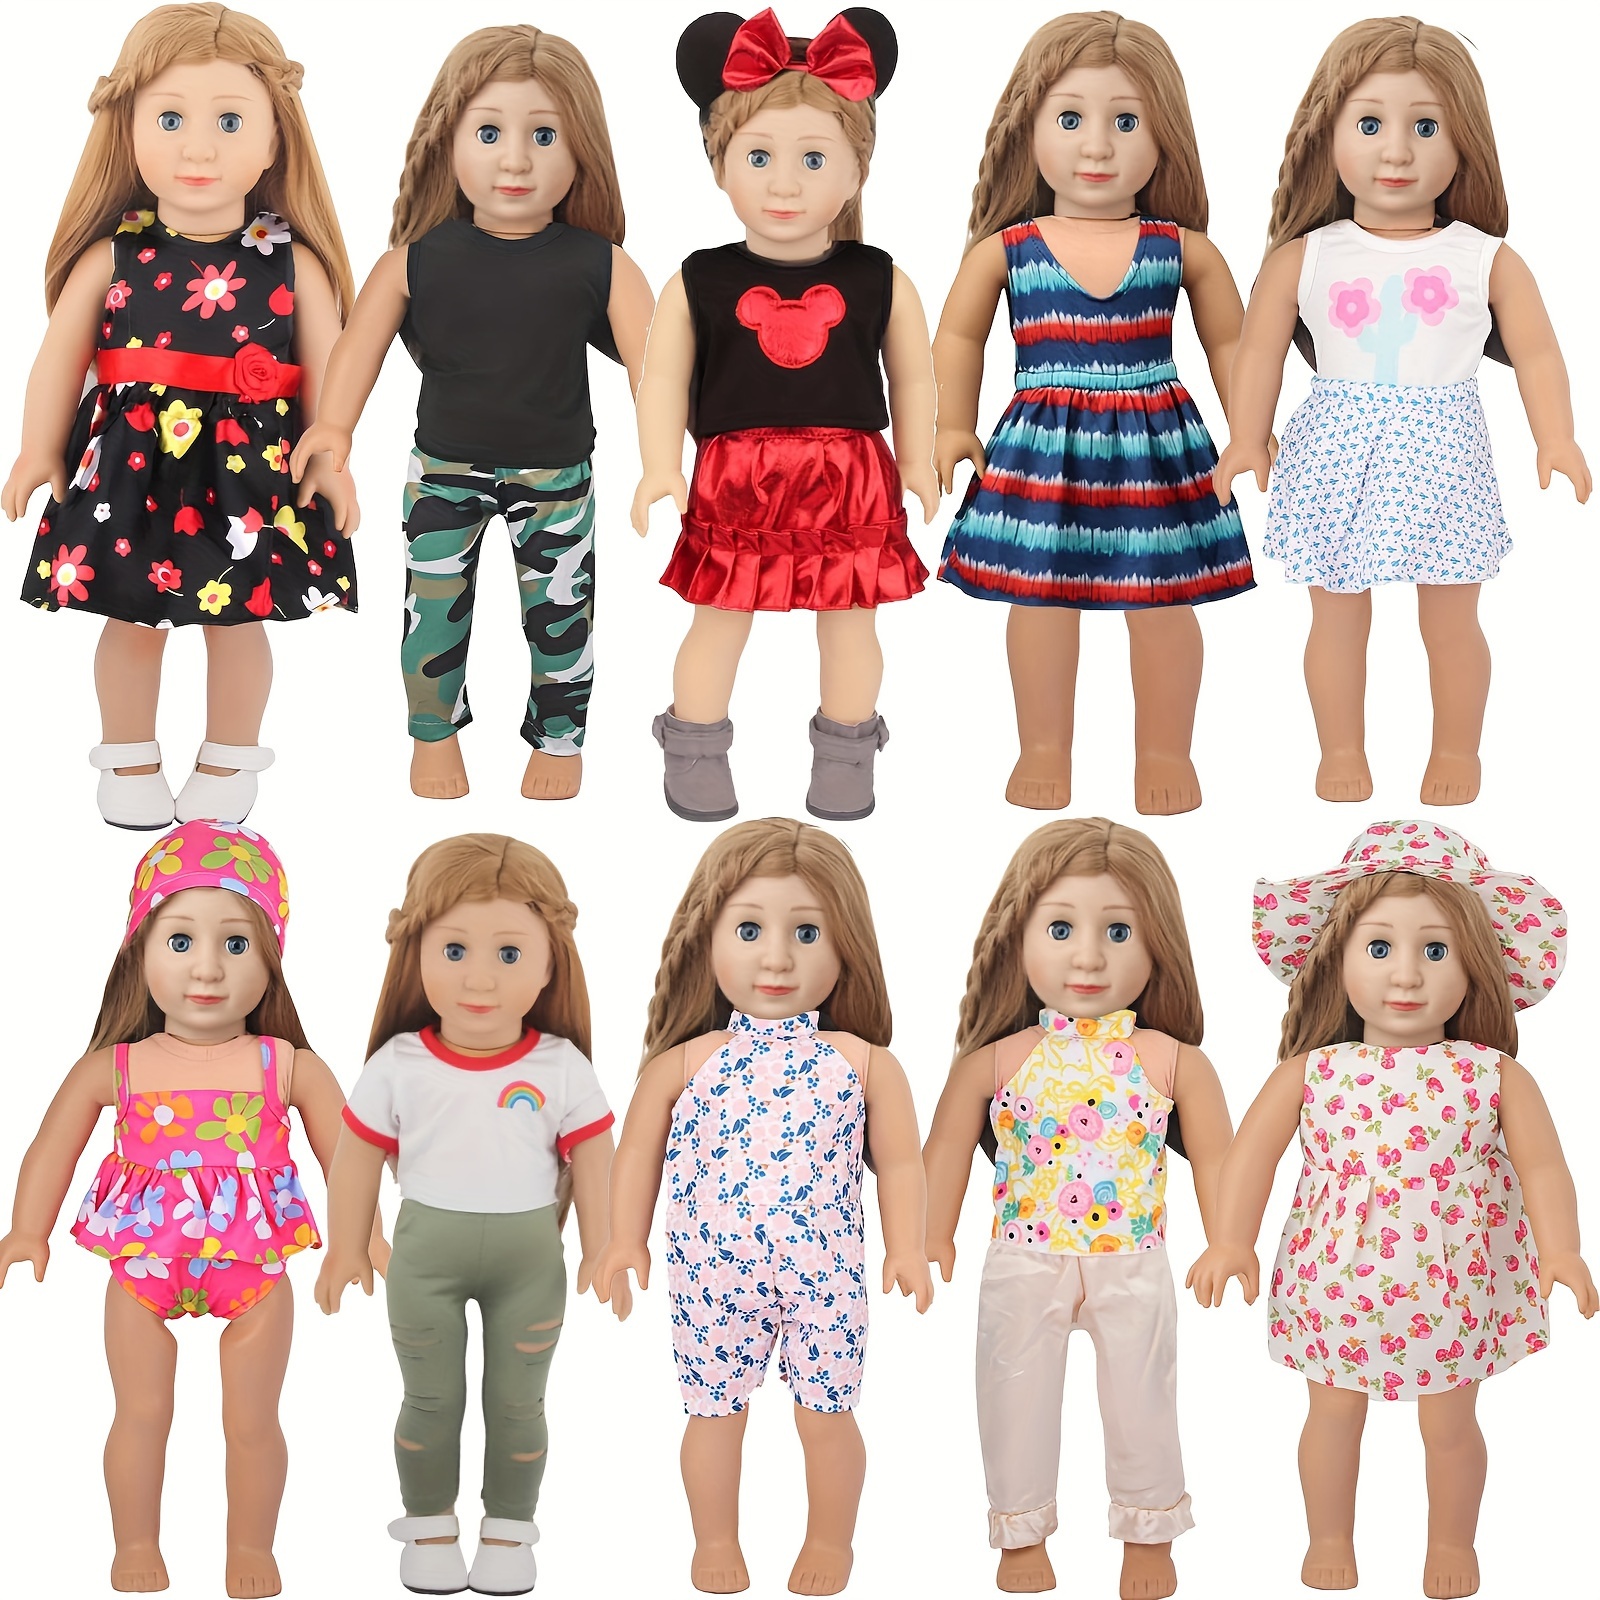 

19 Pcs Doll Clothes Accessories For 18 Inch Dolls, 10 Complete Doll Clothing Sets, Set, Doll Bathrobe, Doll Dress With Flamingo, Cute Doll Costumes For 18 Inch American Dolls